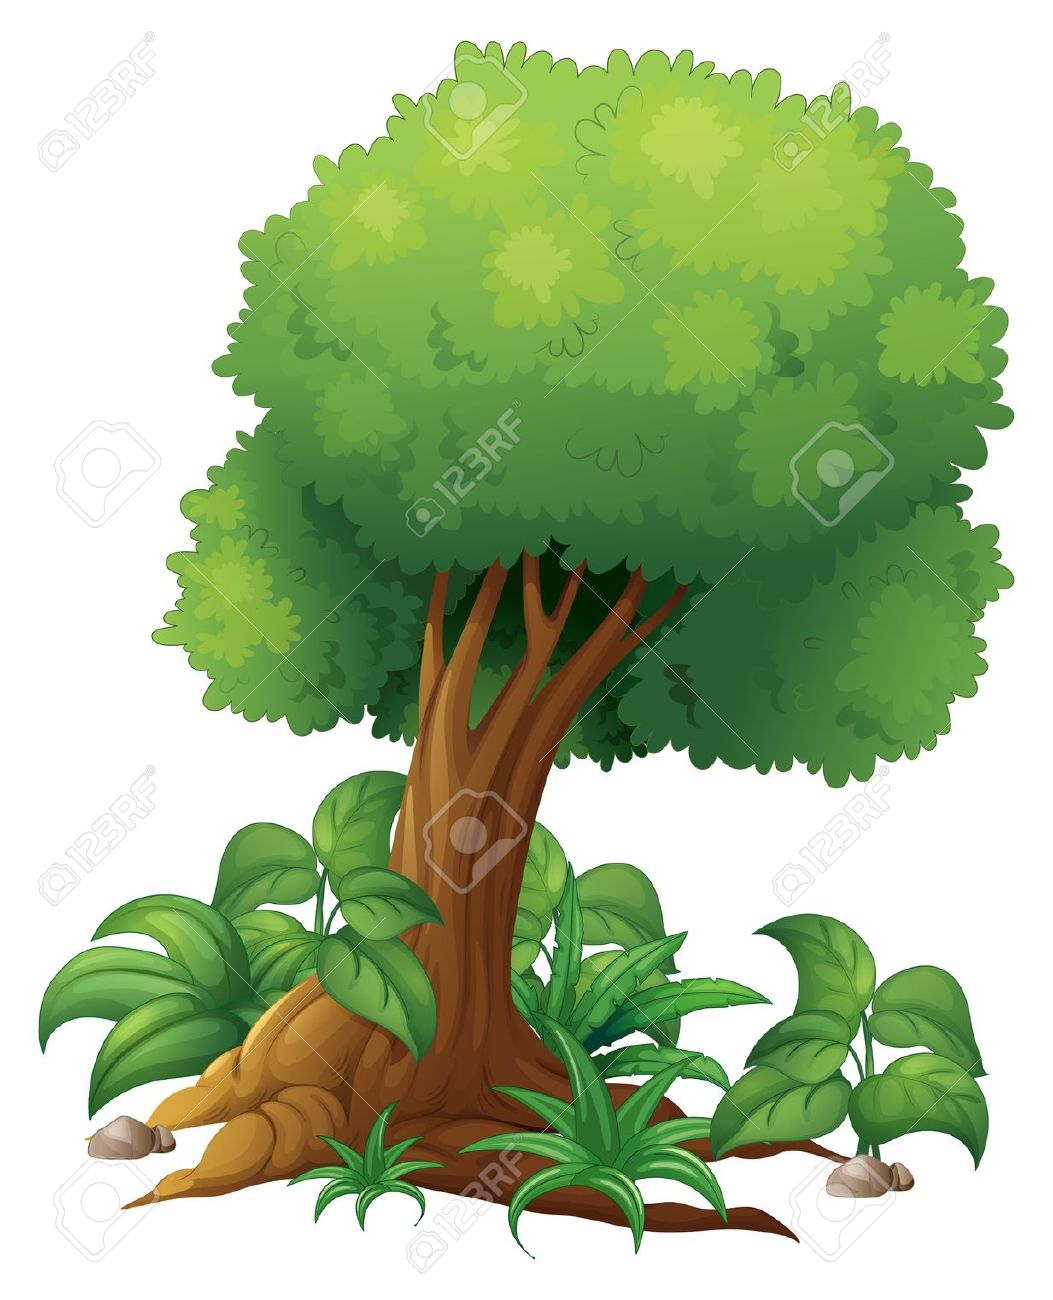 Trees and bushes clipart no background.